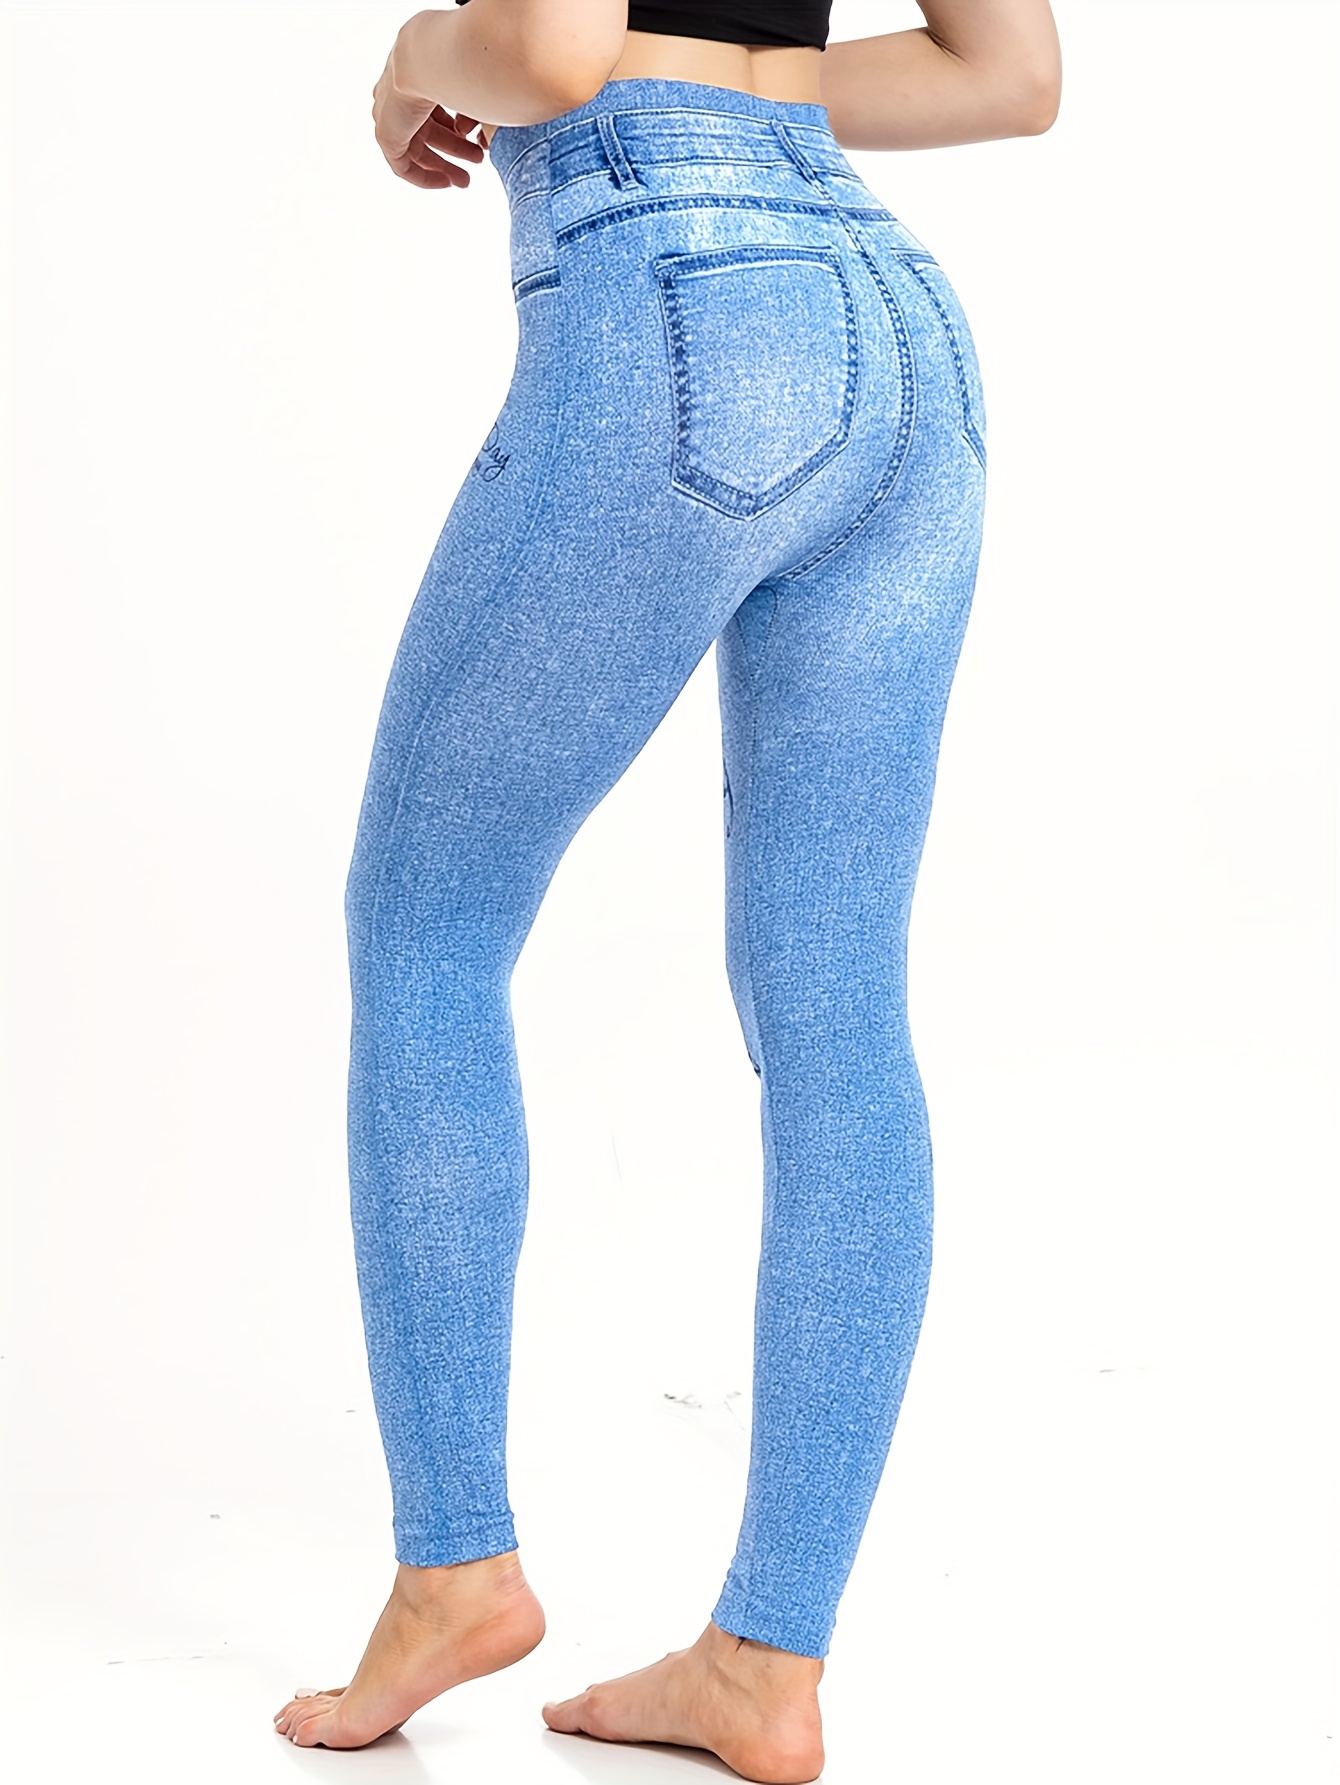 Womens Slim Fit Denim Short Leggings For Women With Hollow Out Design And  Broken Holes Fashionable And Comfortable Shorts In Sizes S 3XL From  Bossbaba, $8.69